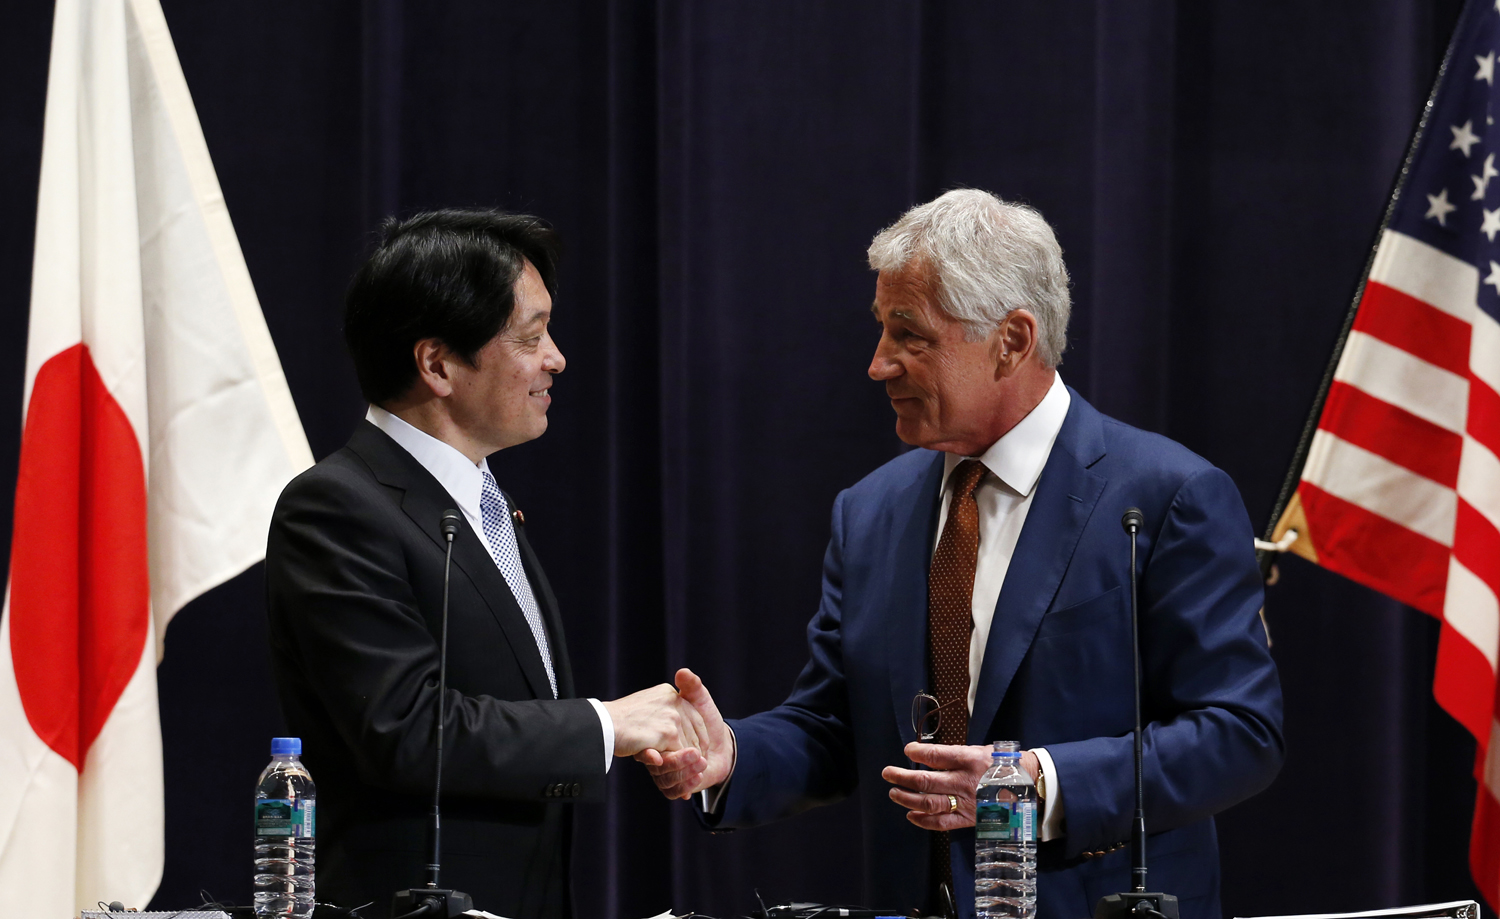 From right: U.S. Secretary of Defense Chuck Hagel shakes hands with his Japanese counterpart Itsunori Onodera at the end of their joint news conference at the Defense Ministry in Tokyo on April 6, 2014. (Issei Kato—Reuters)